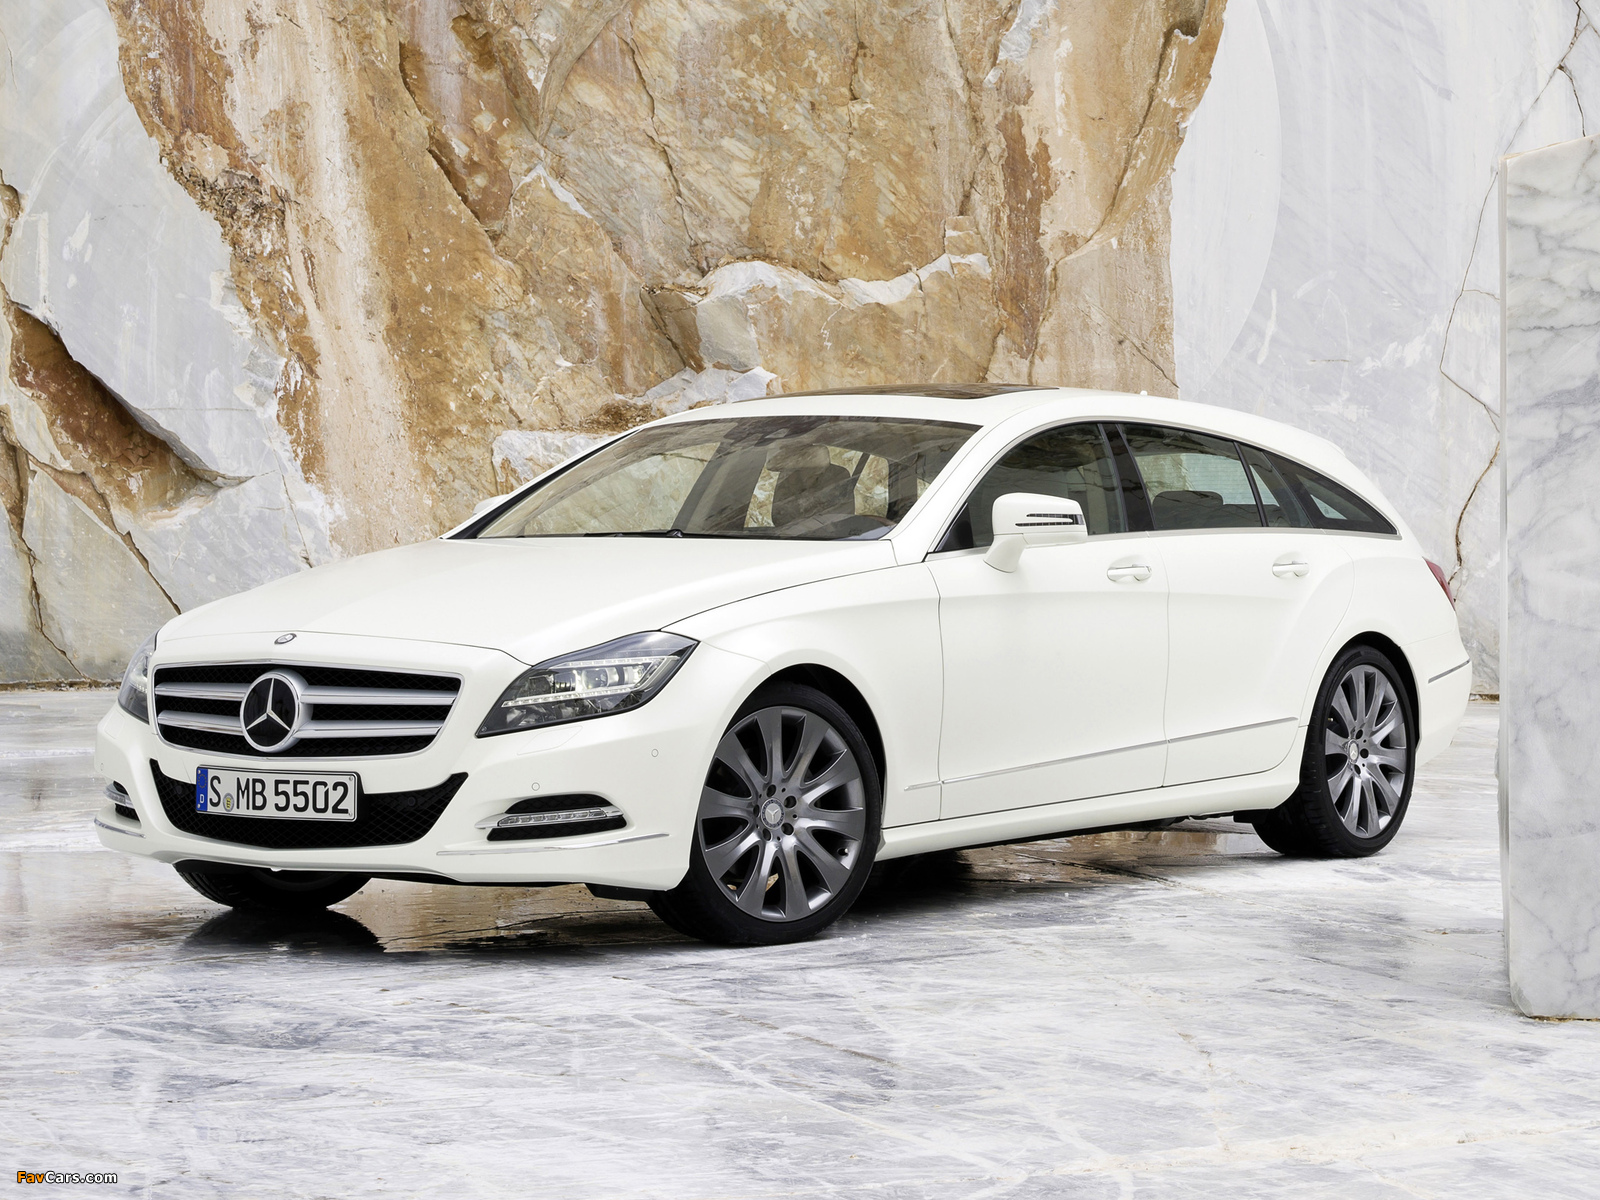 Mercedes-Benz CLS 250 CDI Shooting Brake (X218) 2012 pictures (1600 x 1200)